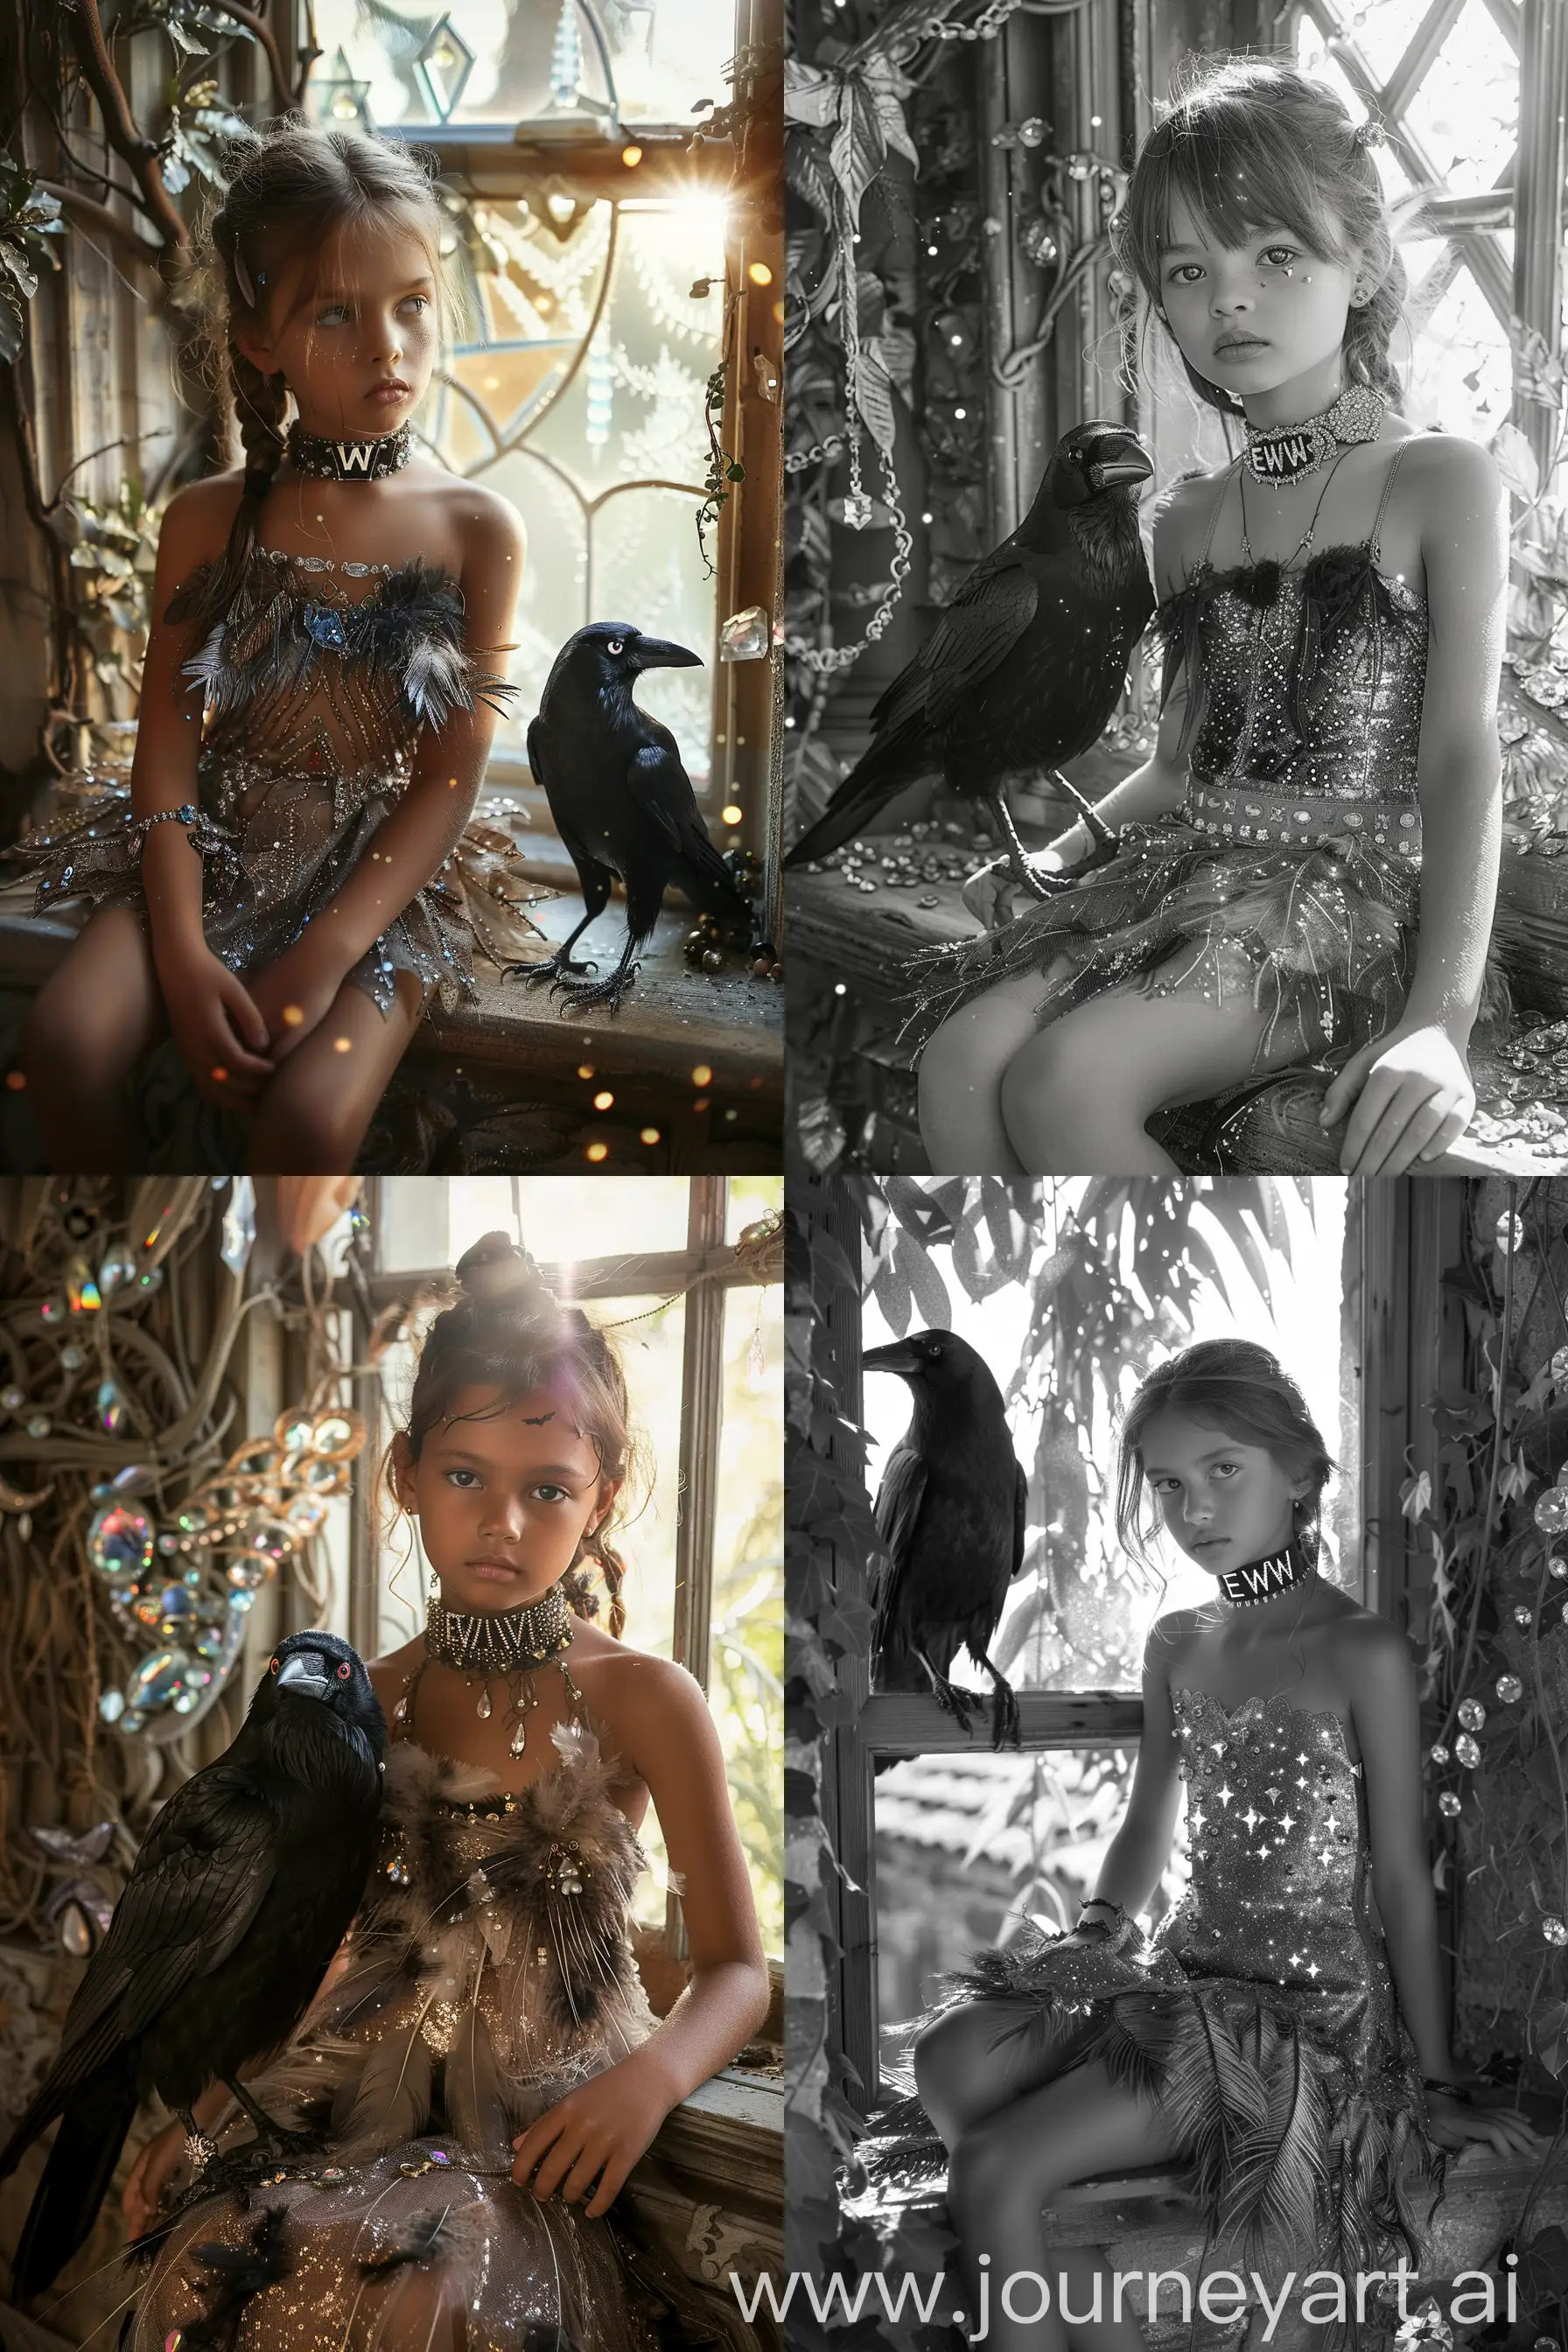 A young girl sits on a window sill, The setting appears to be a gothic-style building., the walls with ivy and a crow is sitting next to the girl , Everything is a fantasy atmosphere the girl wears a choker with the insription "EWW" and a dress with crowfeather finishes and shiny gems and wears a lot of jewelry, in the landscape there are gems, glitter and diamonds, bright light, --ar 2:3 --stylize 250 --style raw
